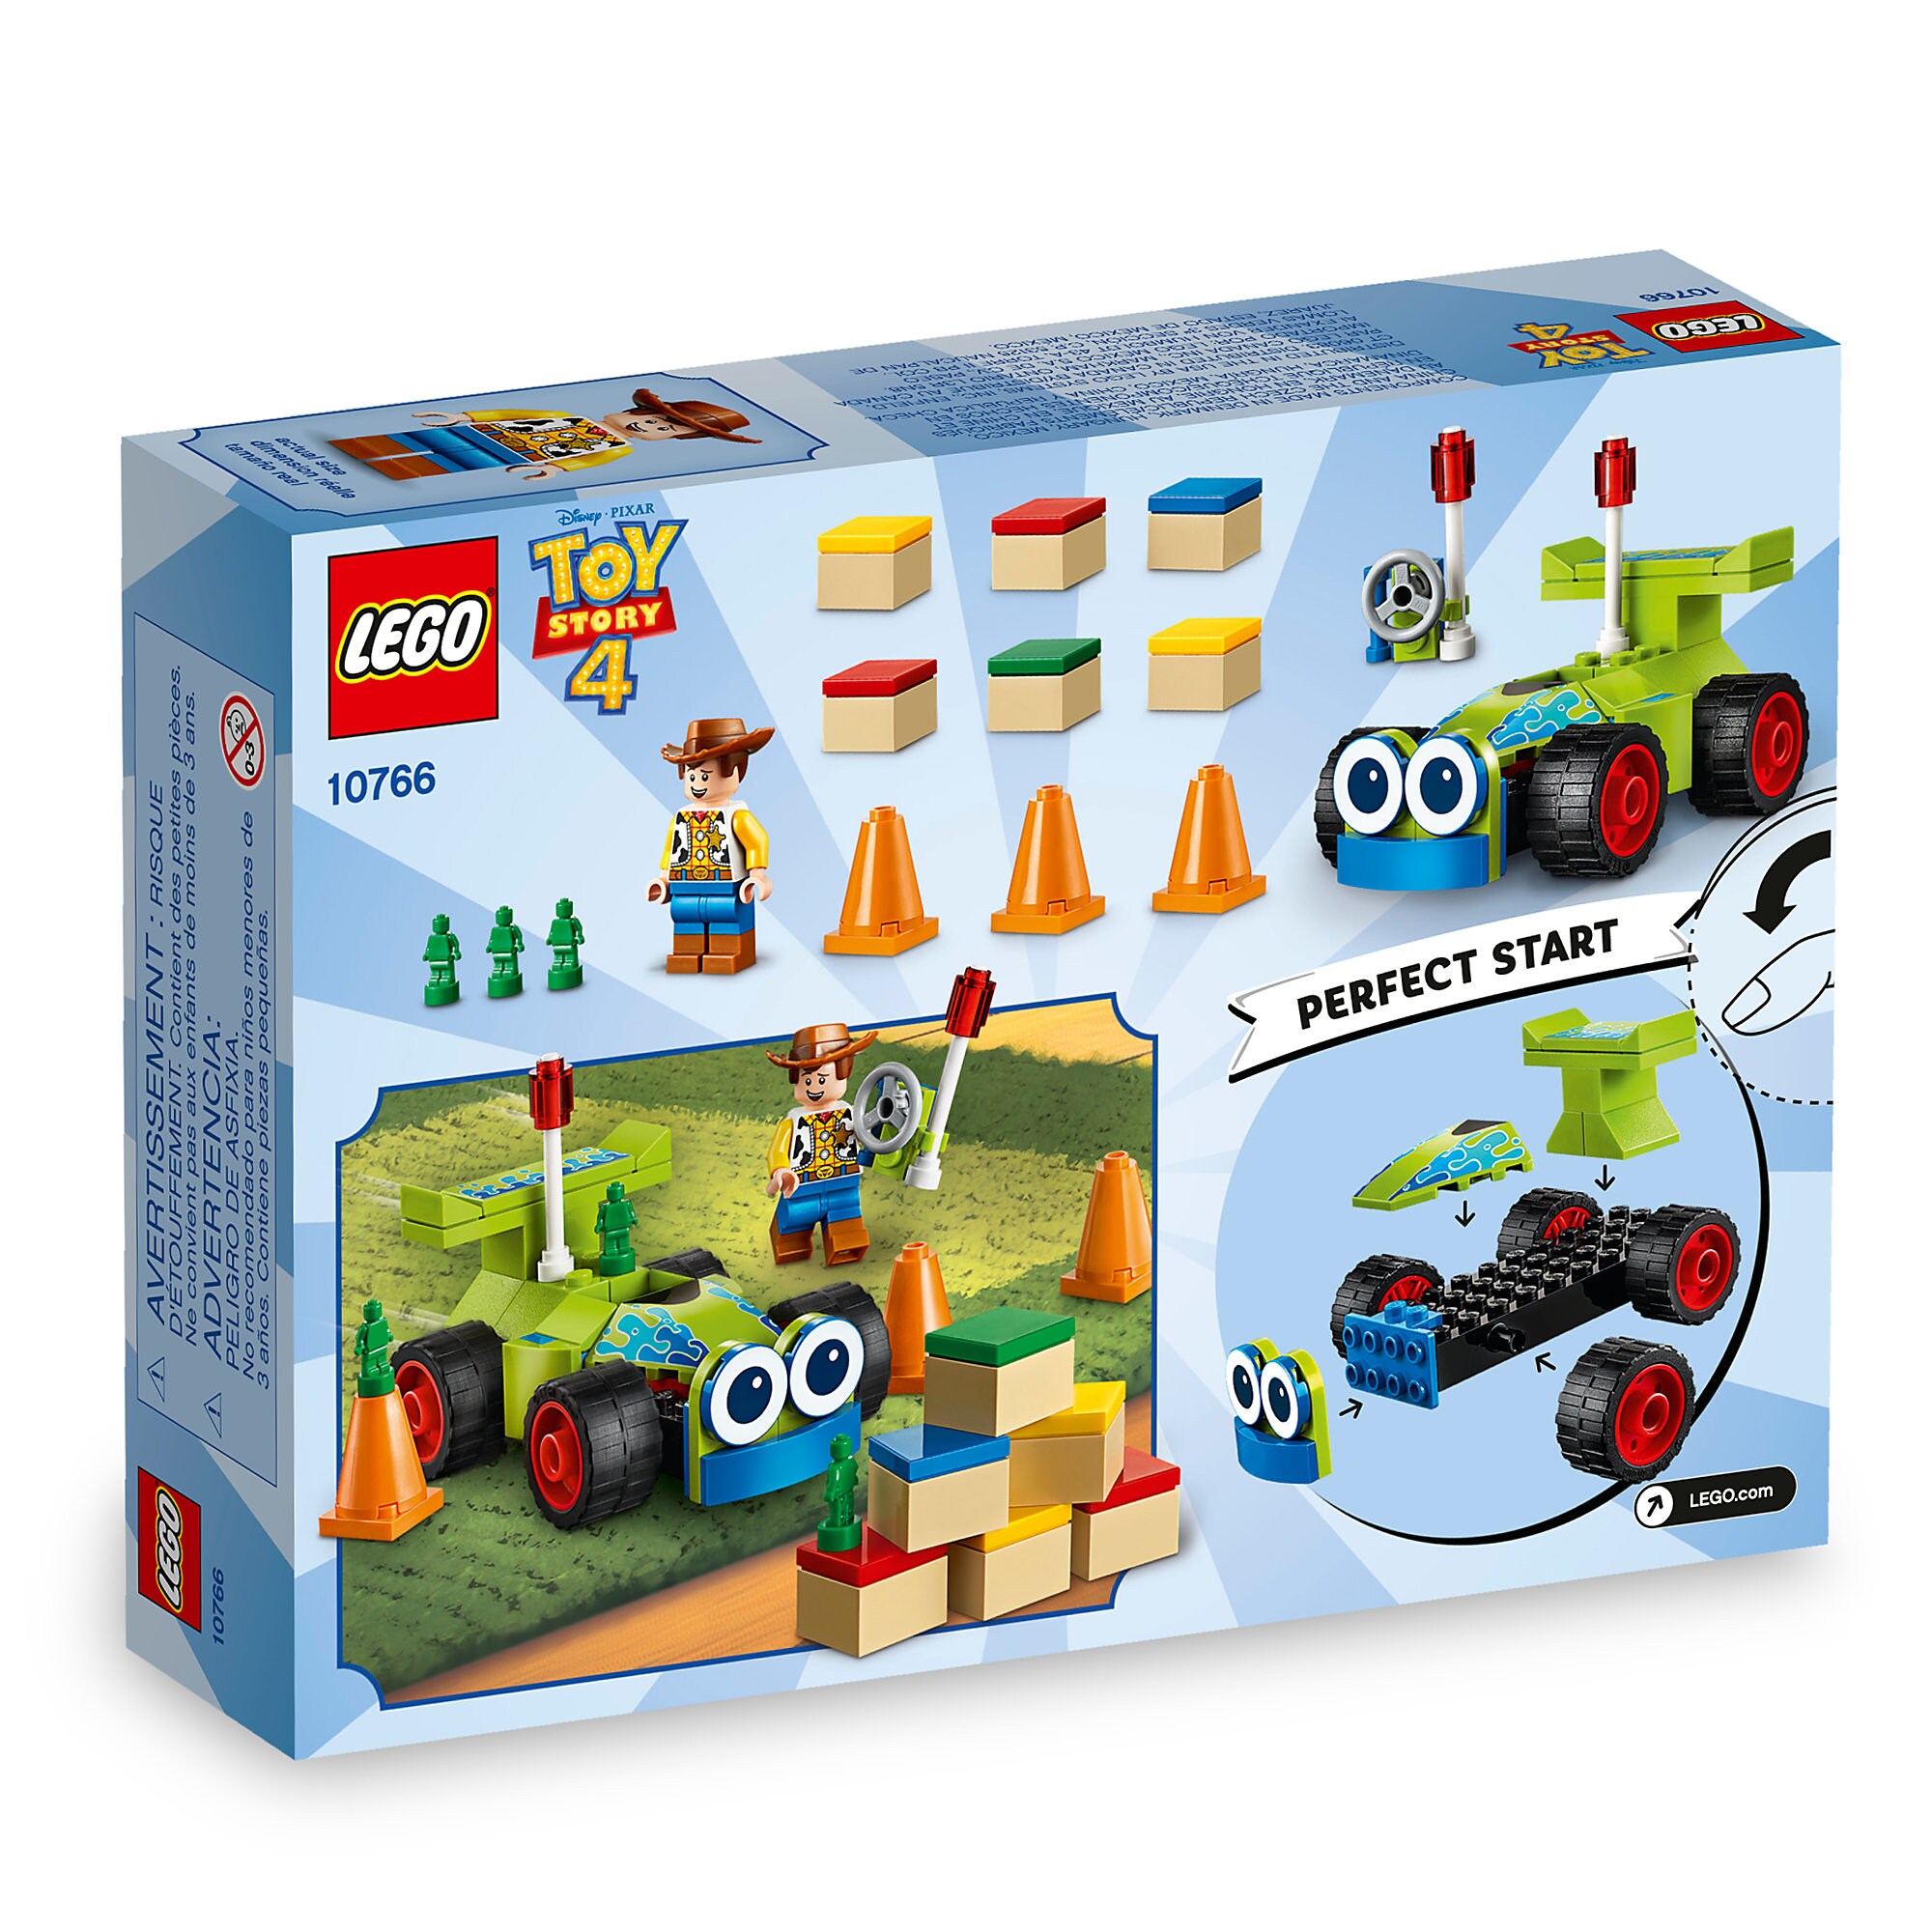 Woody & RC Play Set by LEGO - Toy Story 4